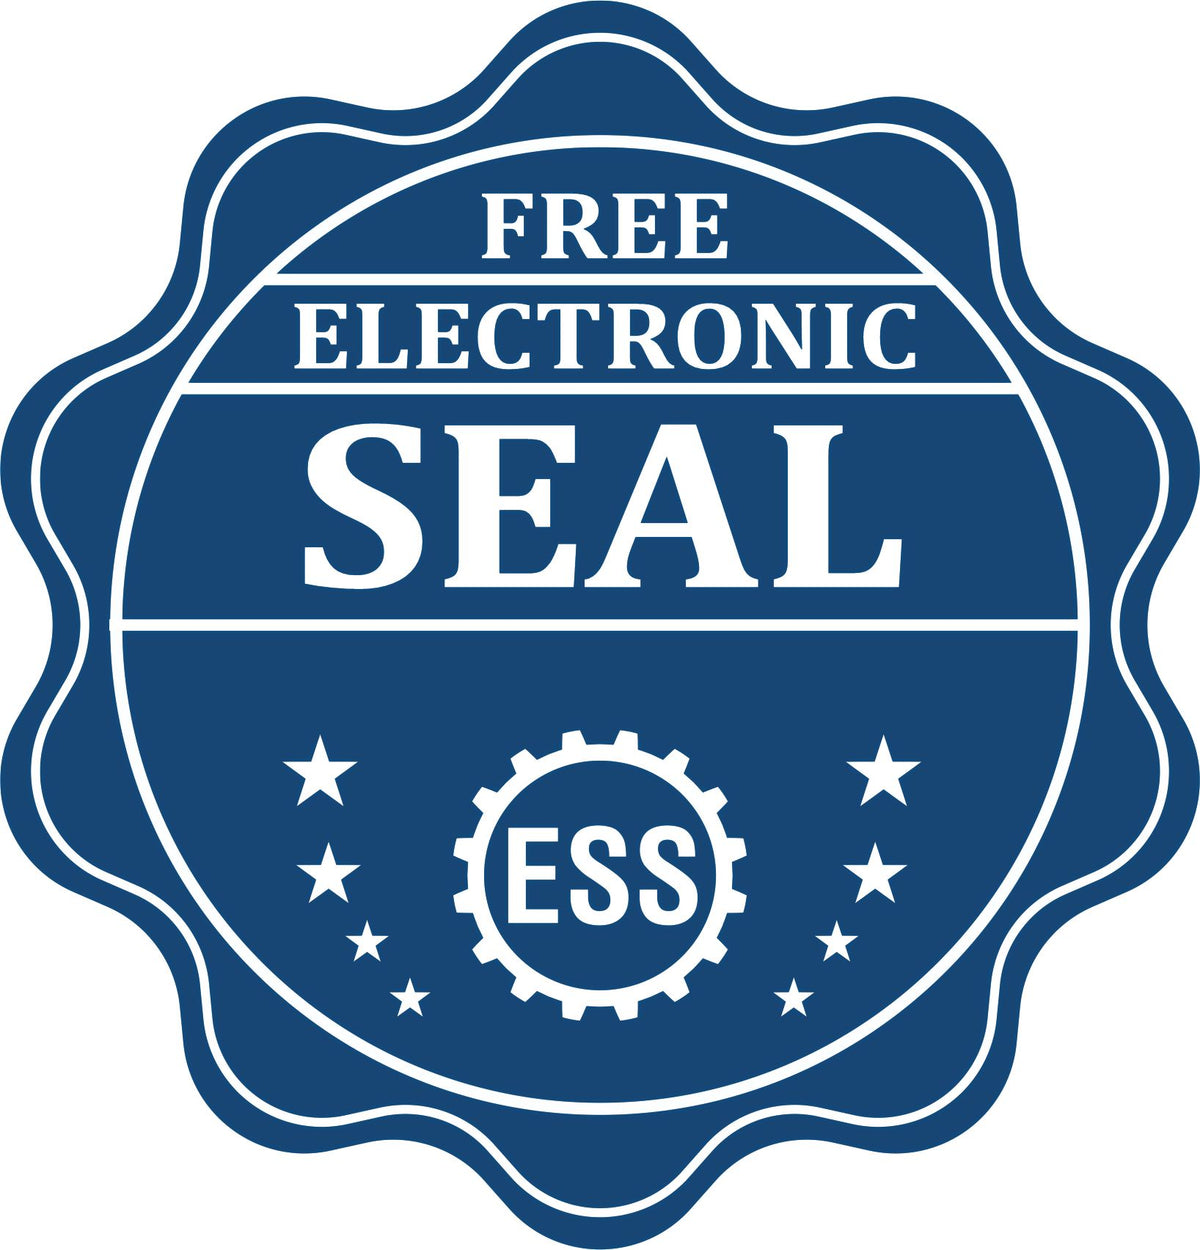 A badge showing a free electronic seal for the Mississippi Geologist Desk Seal with stars and the ESS gear on the emblem.